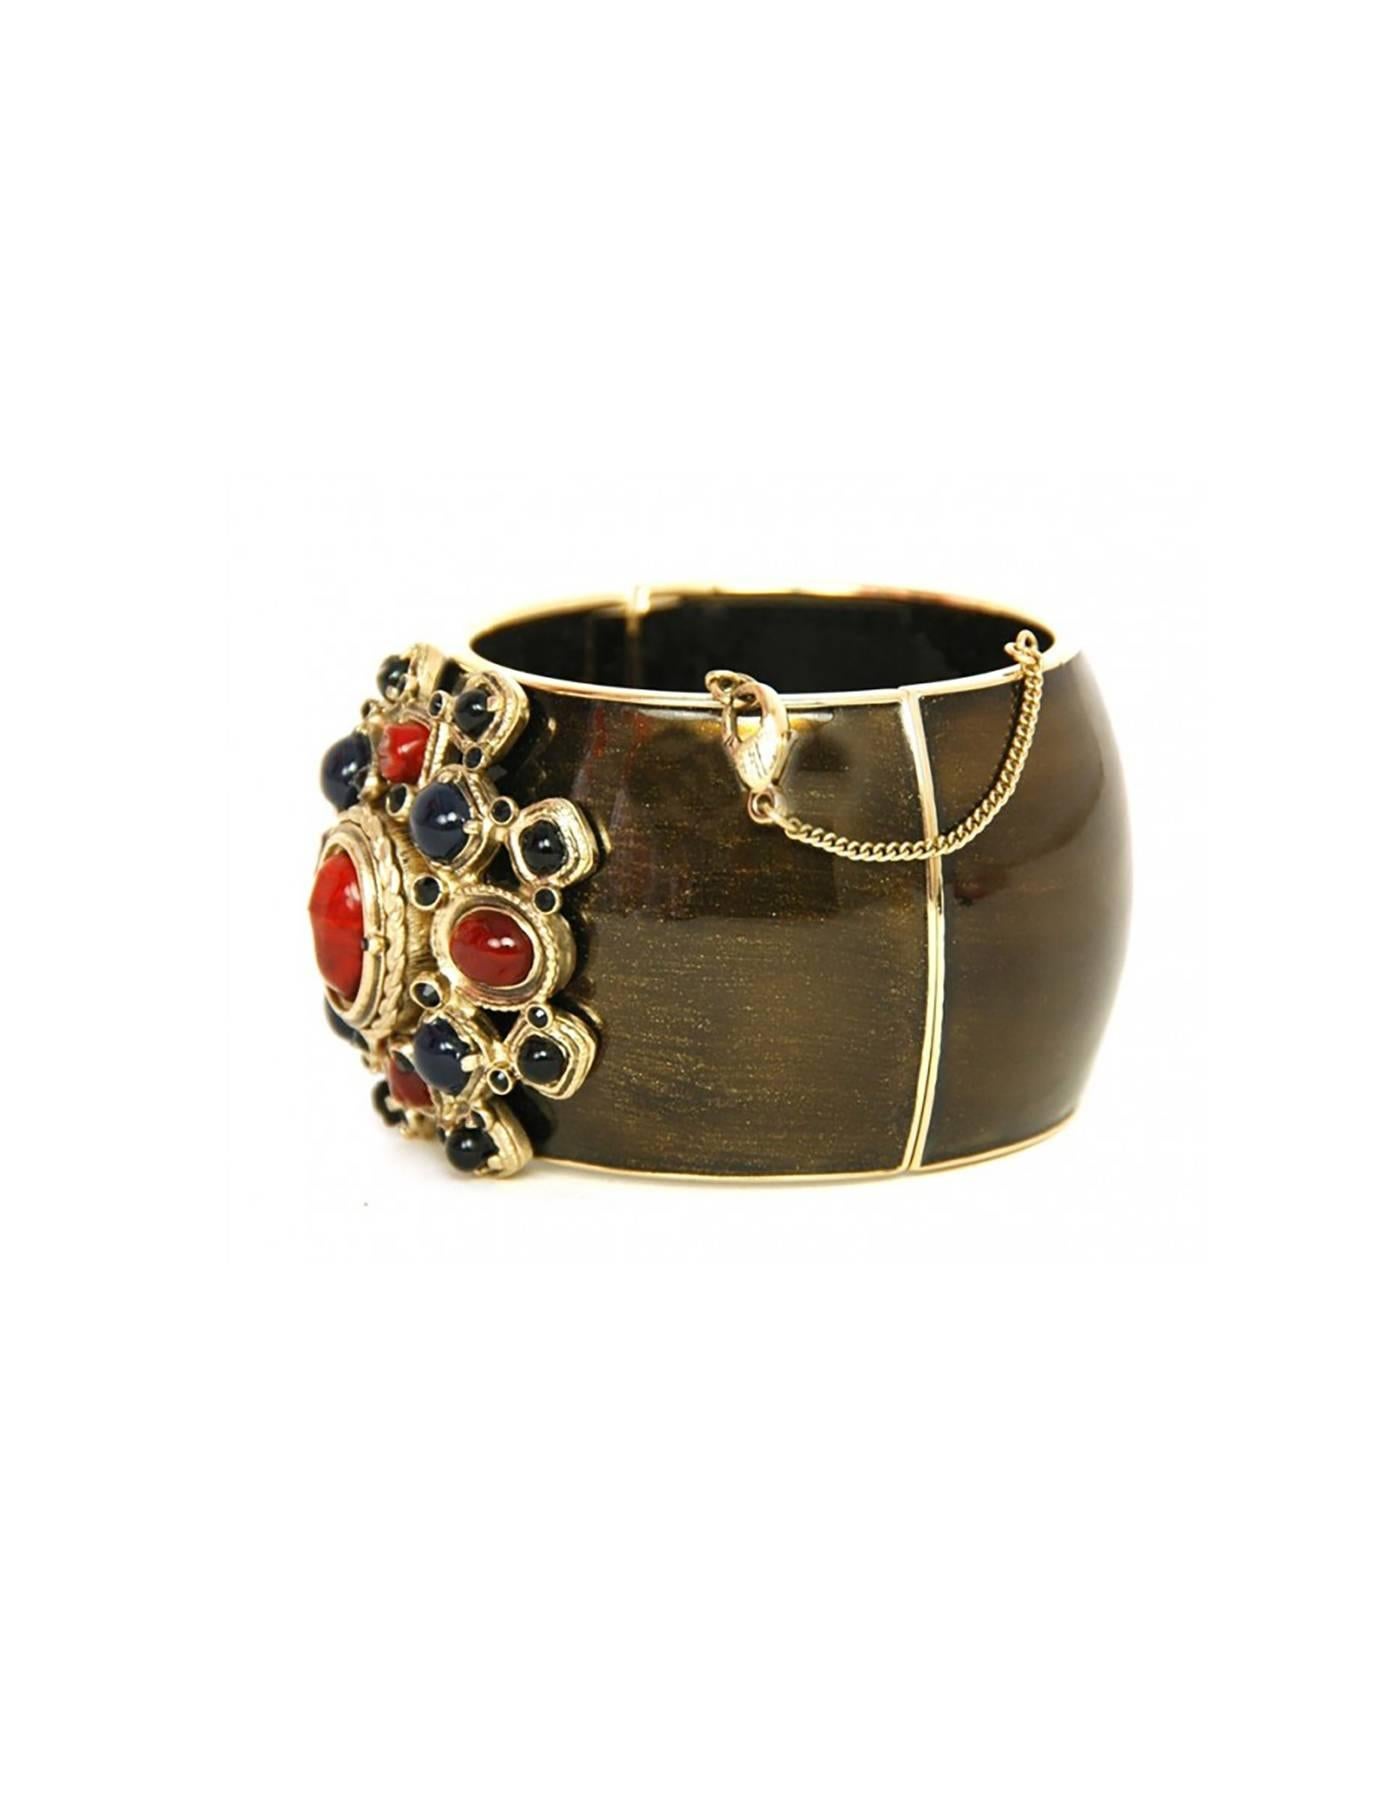 Chanel '10 Resort Runway Bronze, Blue & Red Cuff Bracelet In Excellent Condition In New York, NY